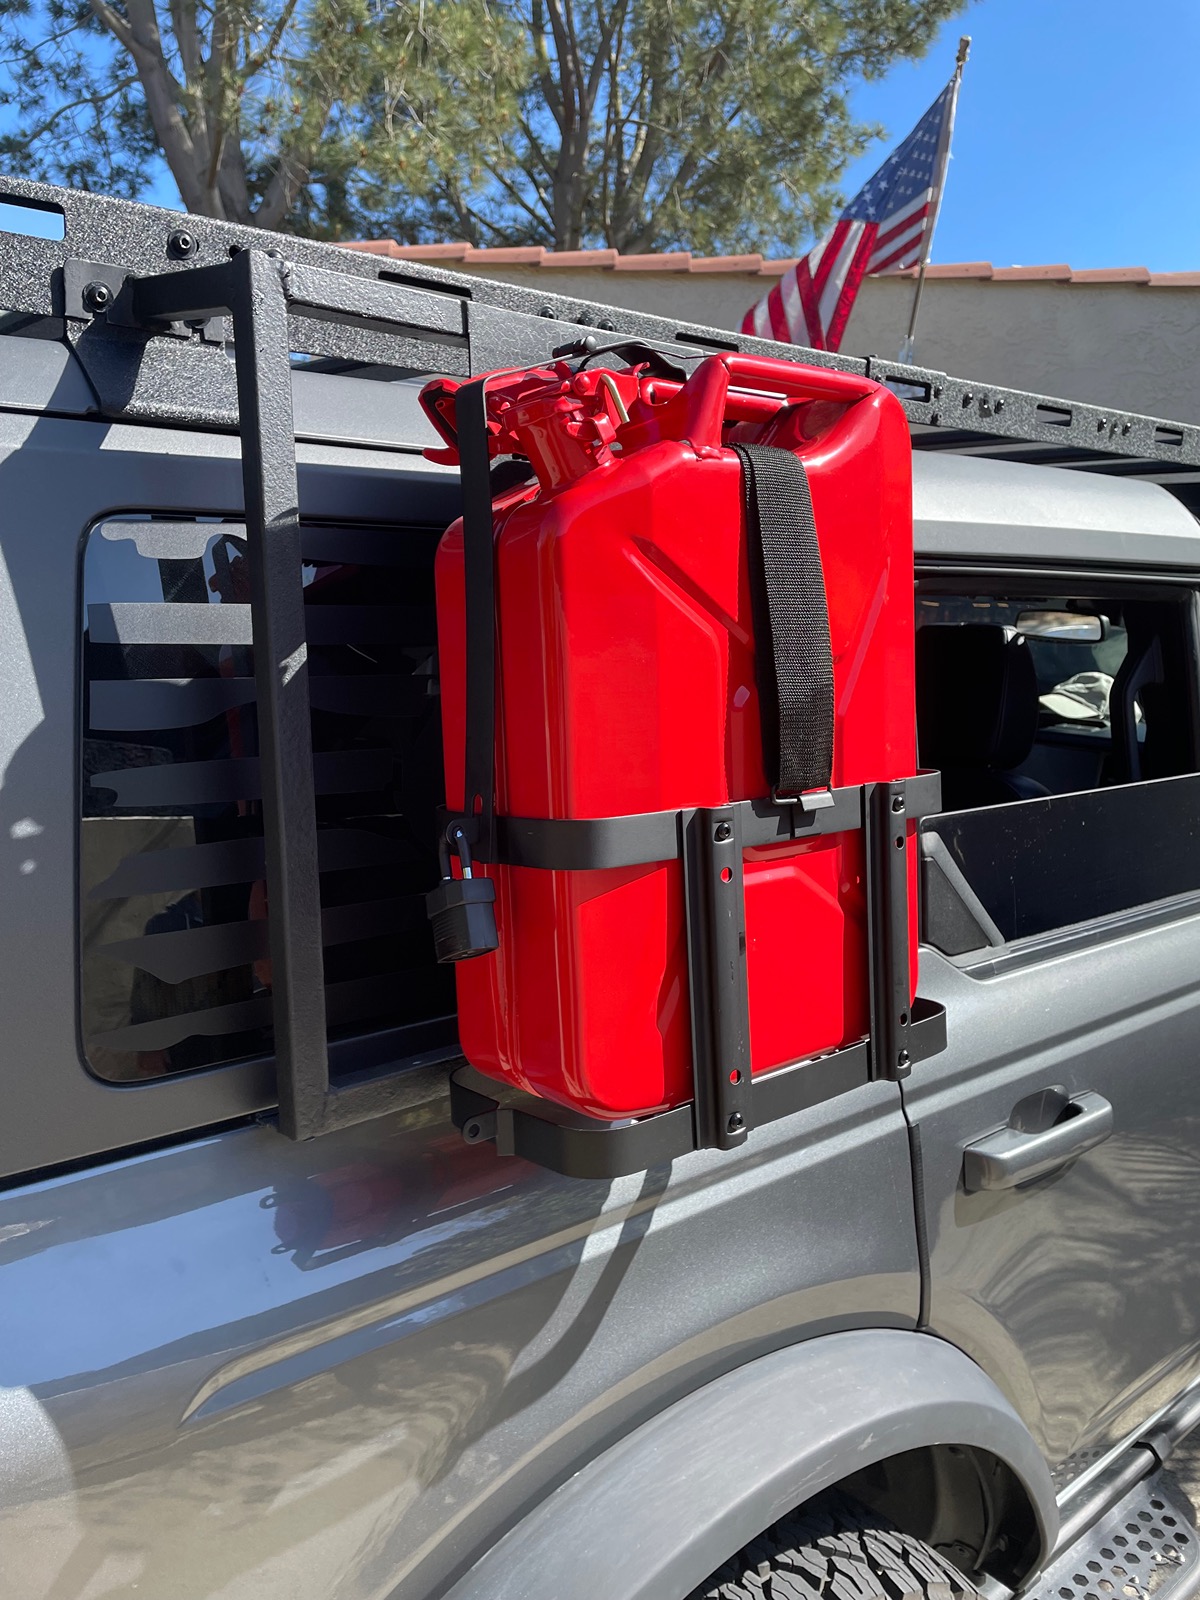 Ford Bronco Bronco Saddle Bags for Jerry Gas Cans - My DIY Welded Solution IMG_2269